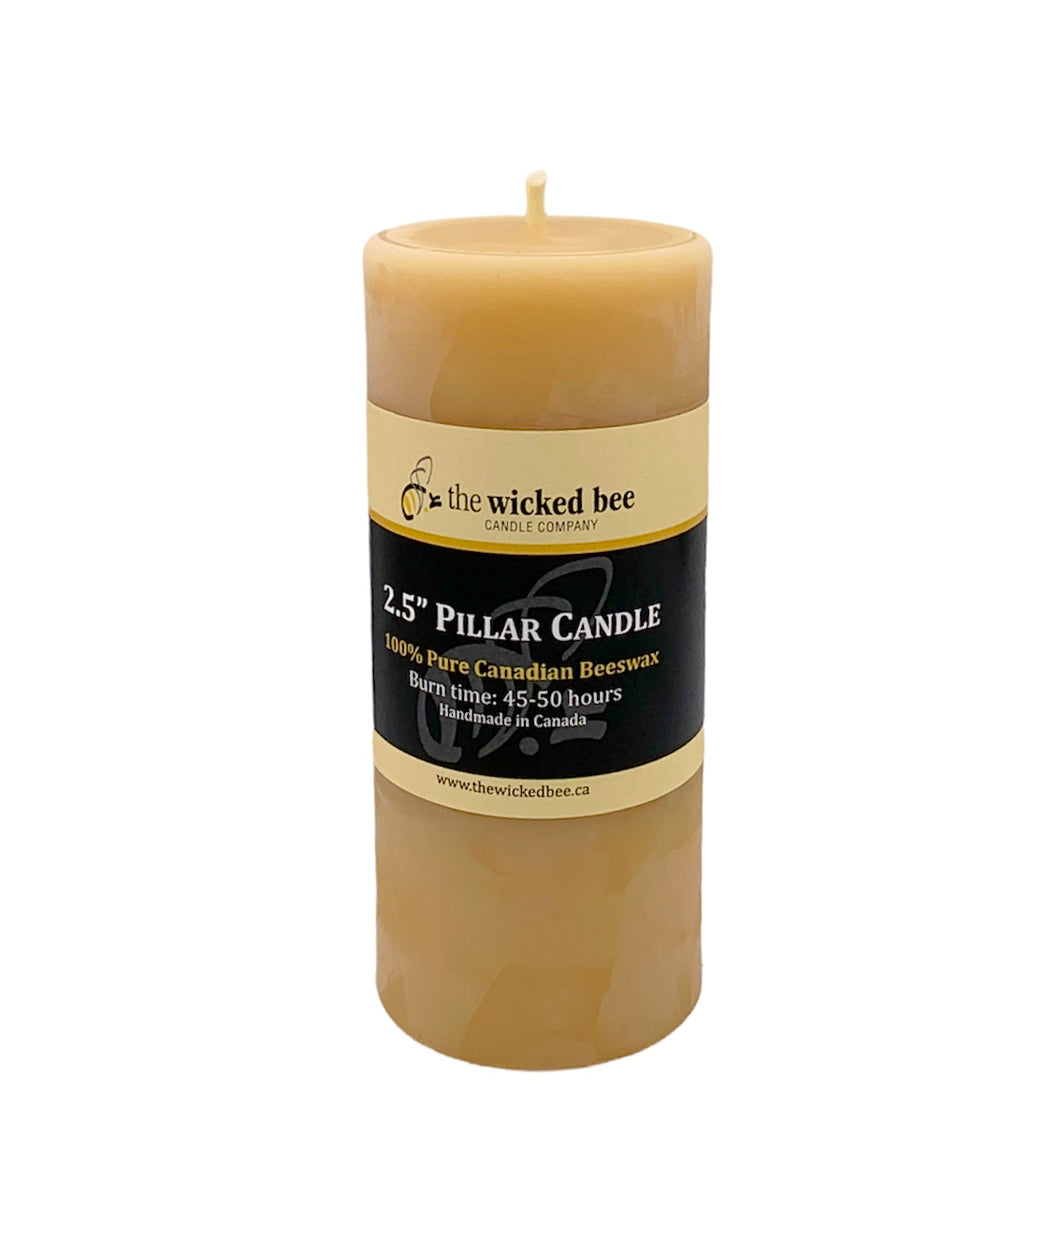 Beeswax Pillar Candle (the wicked bee)